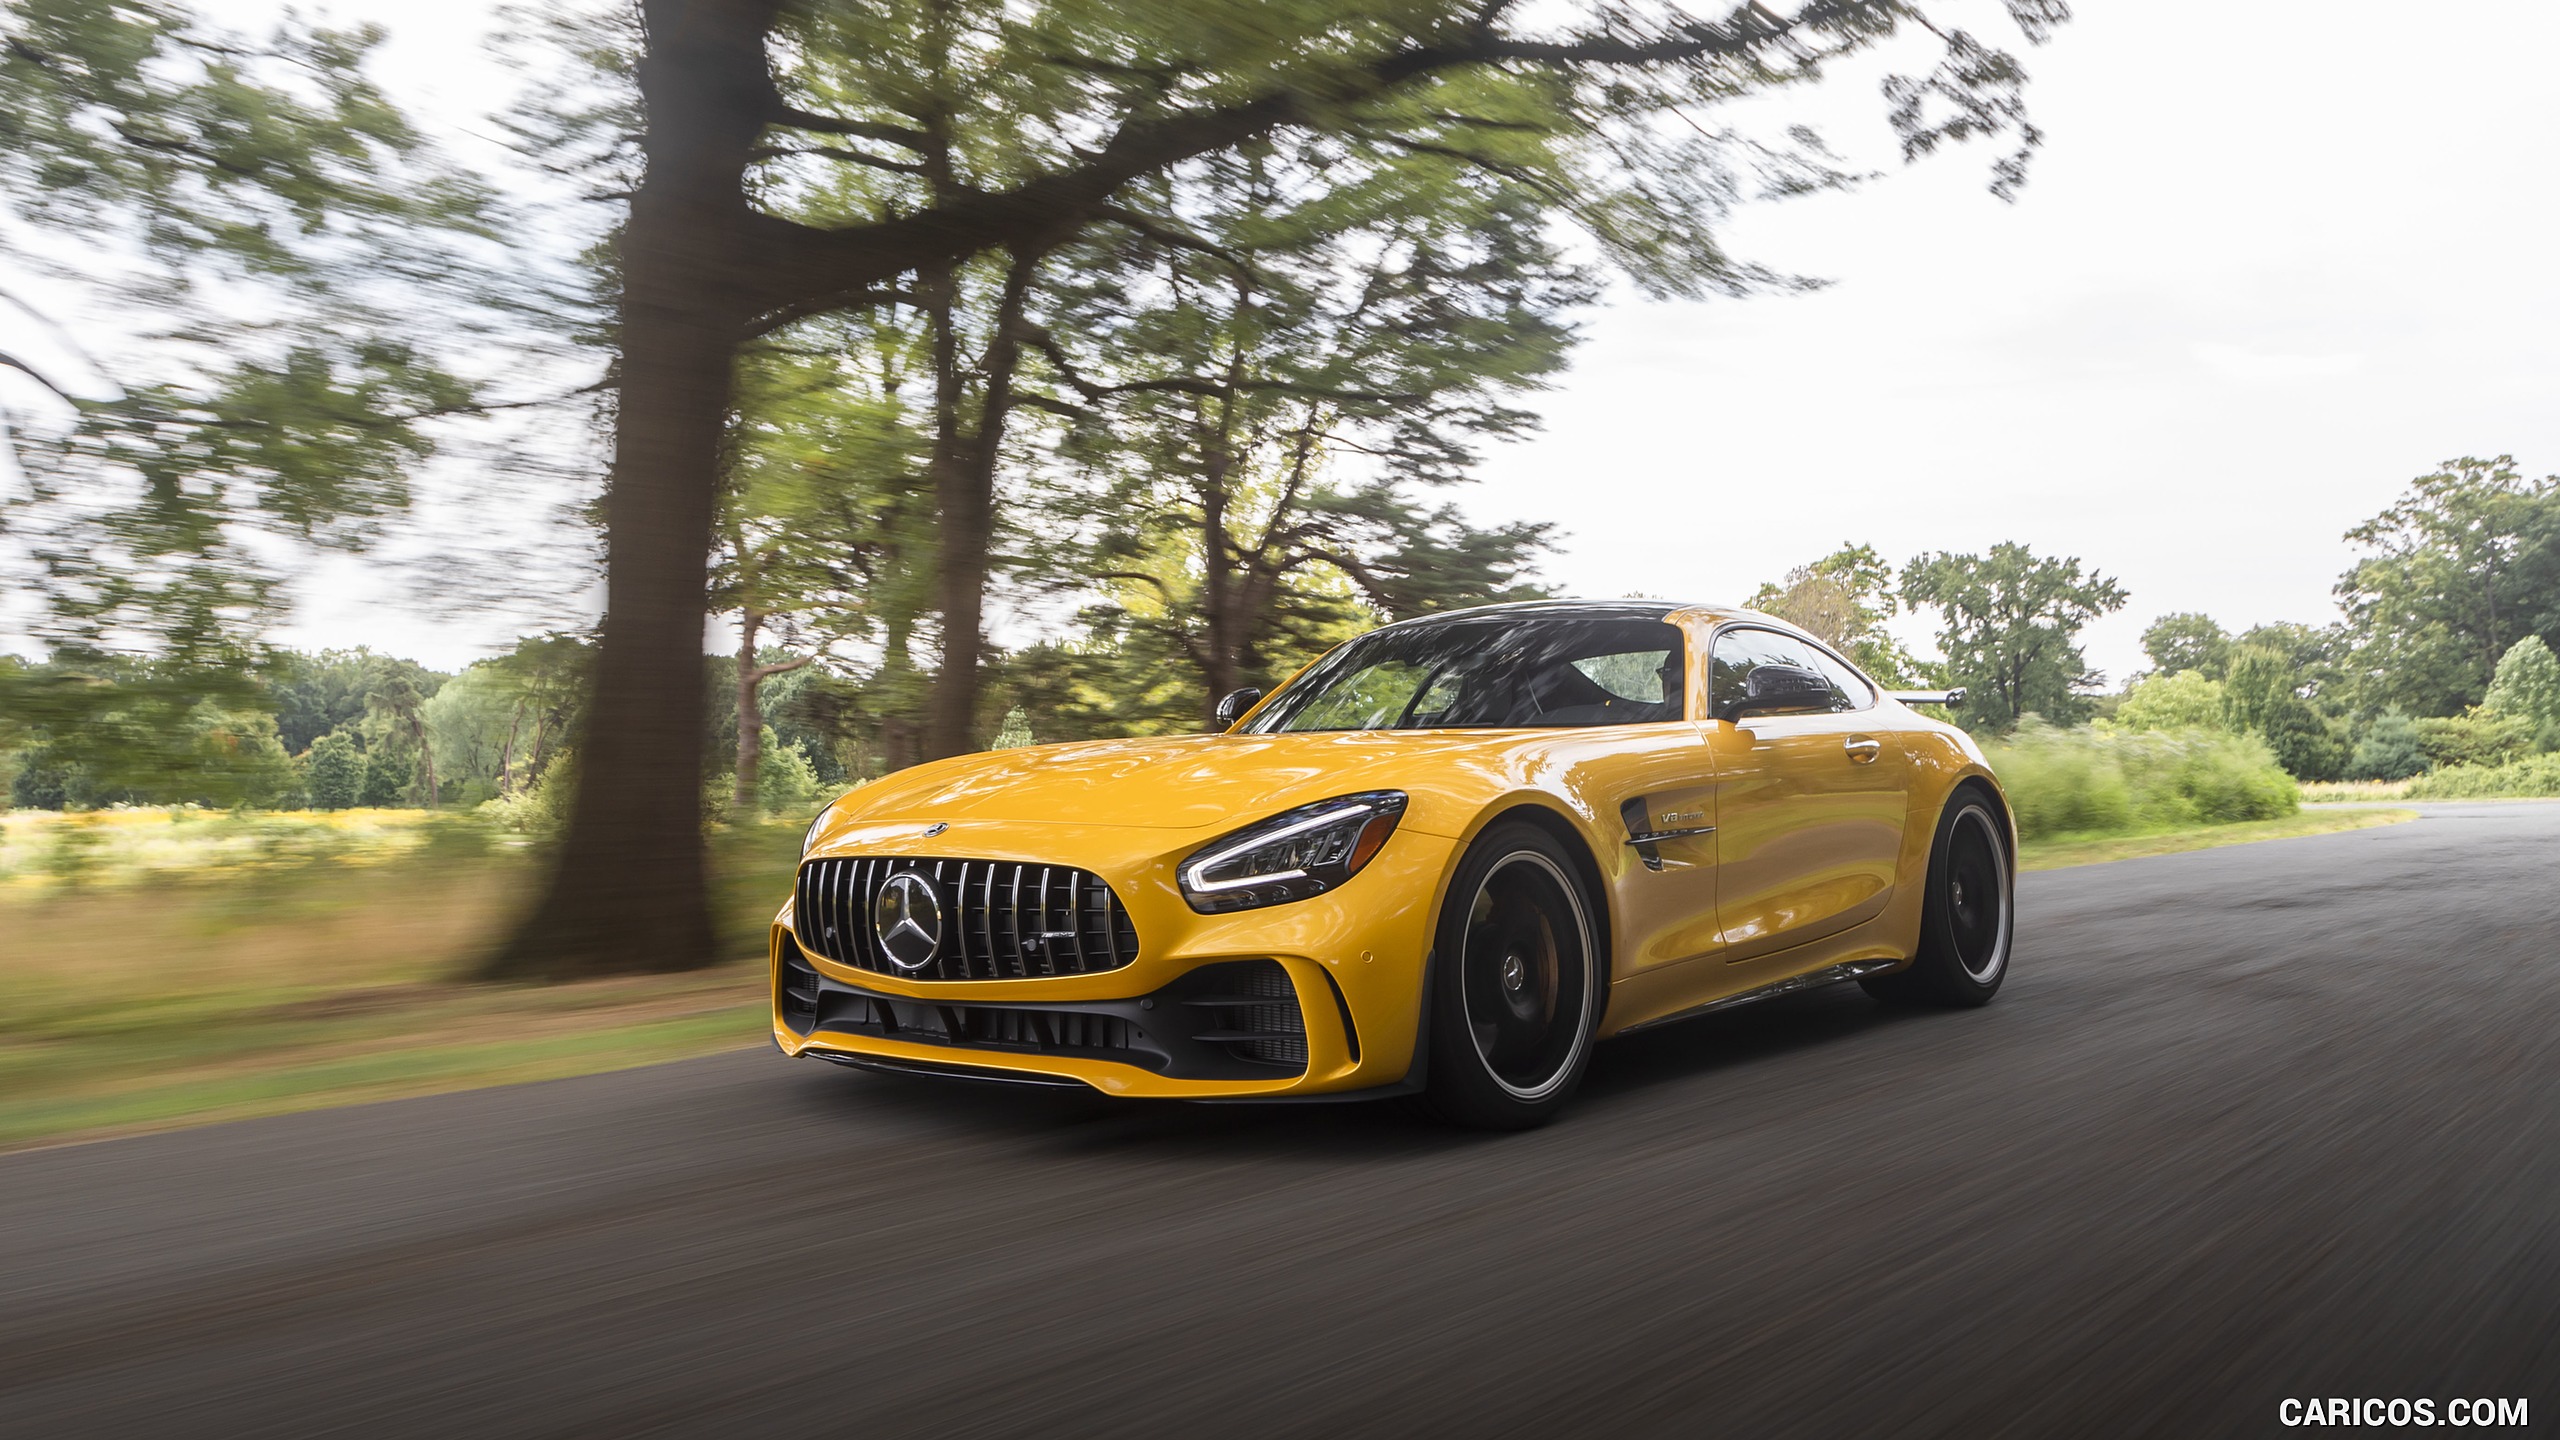 2020 Mercedes-AMG GT R Coupe (US-Spec) - Front Three-Quarter, #244 of 328